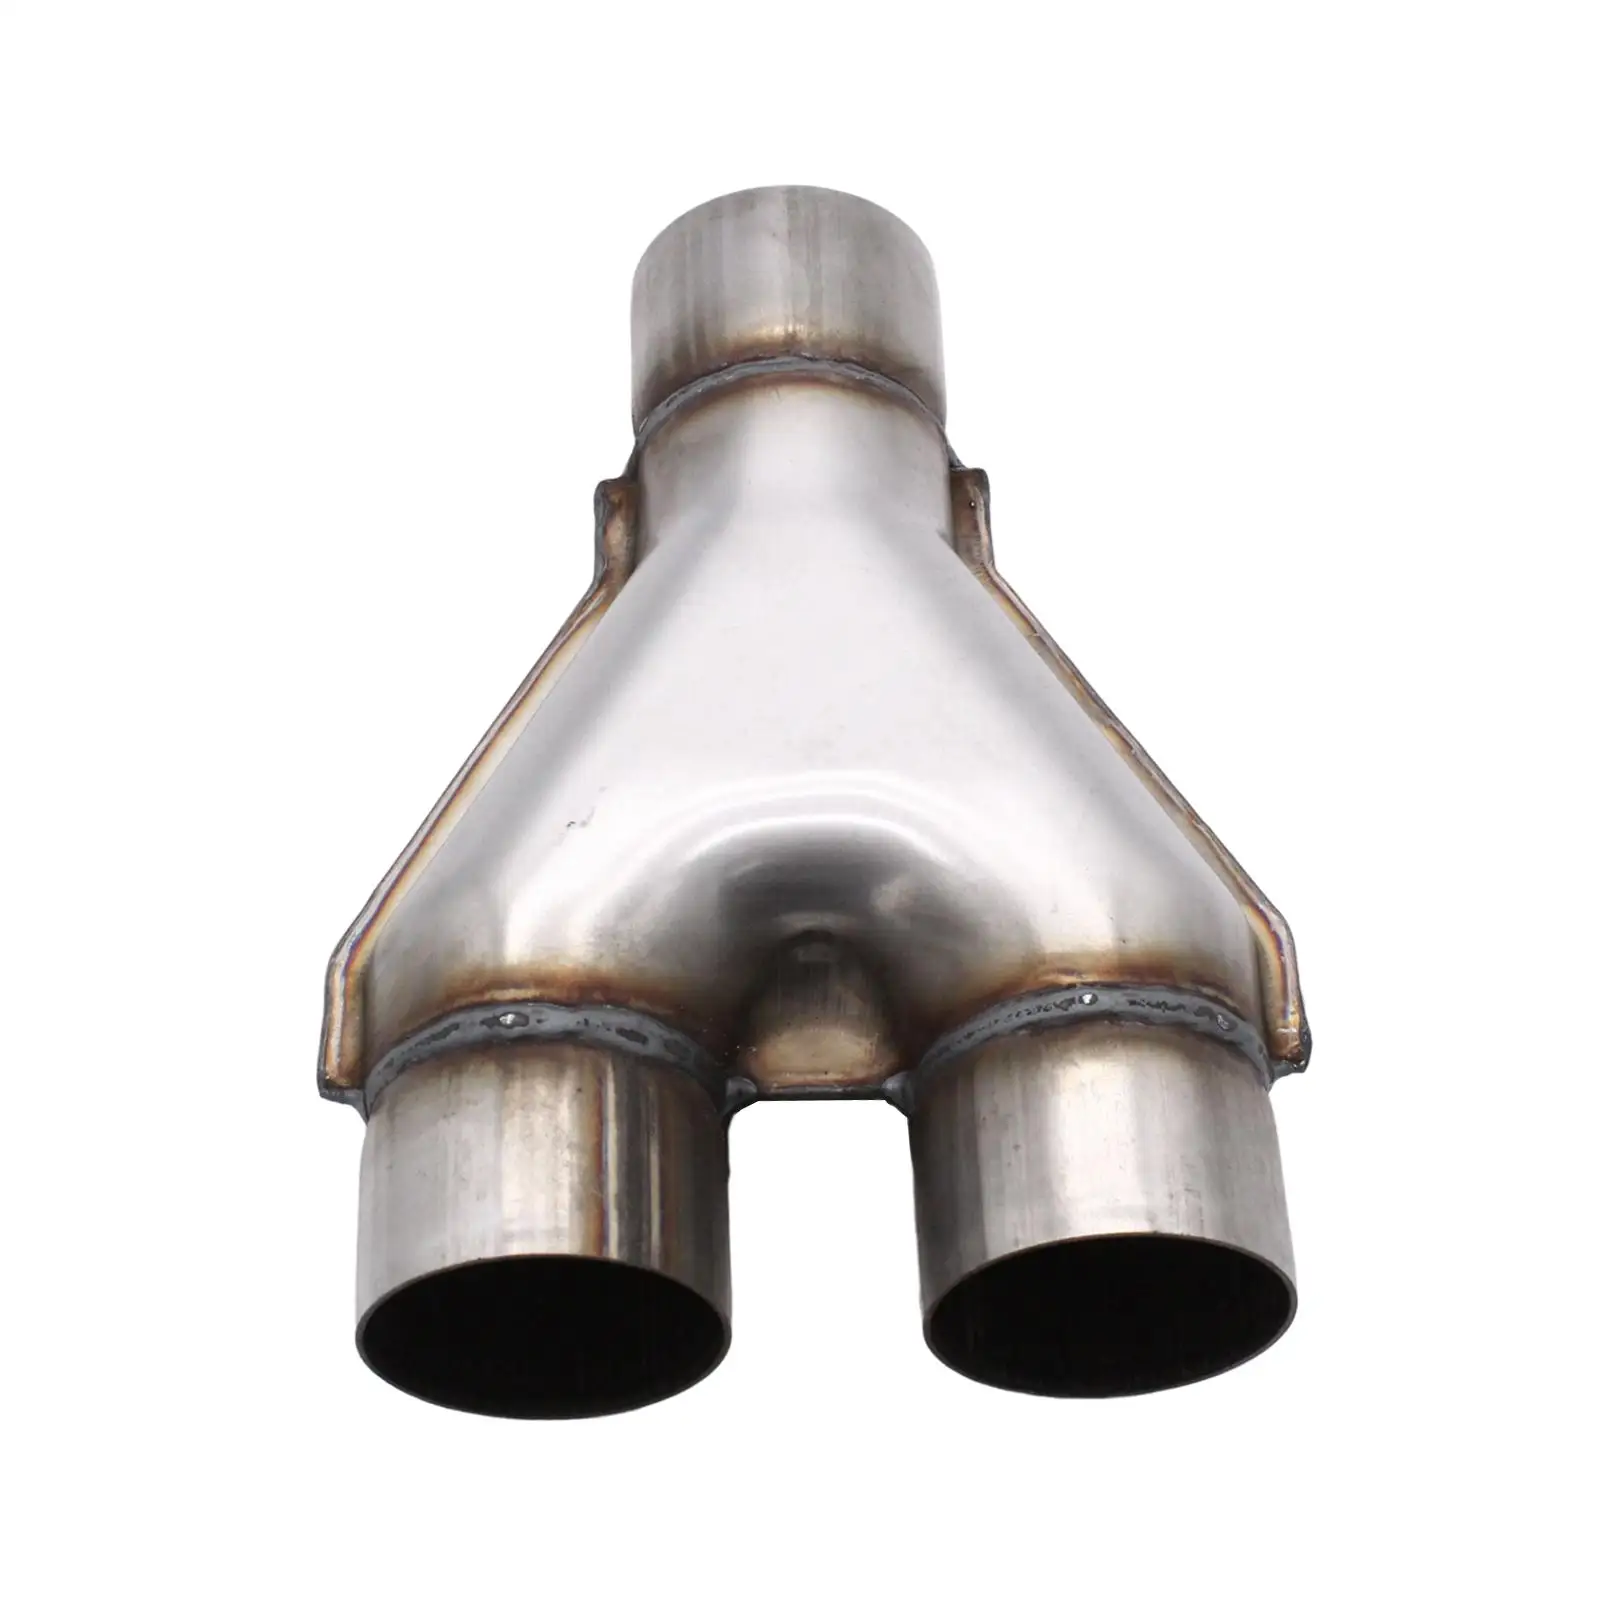 Exhaust Pipe Accessory for Good Performance Easily Install Replacement